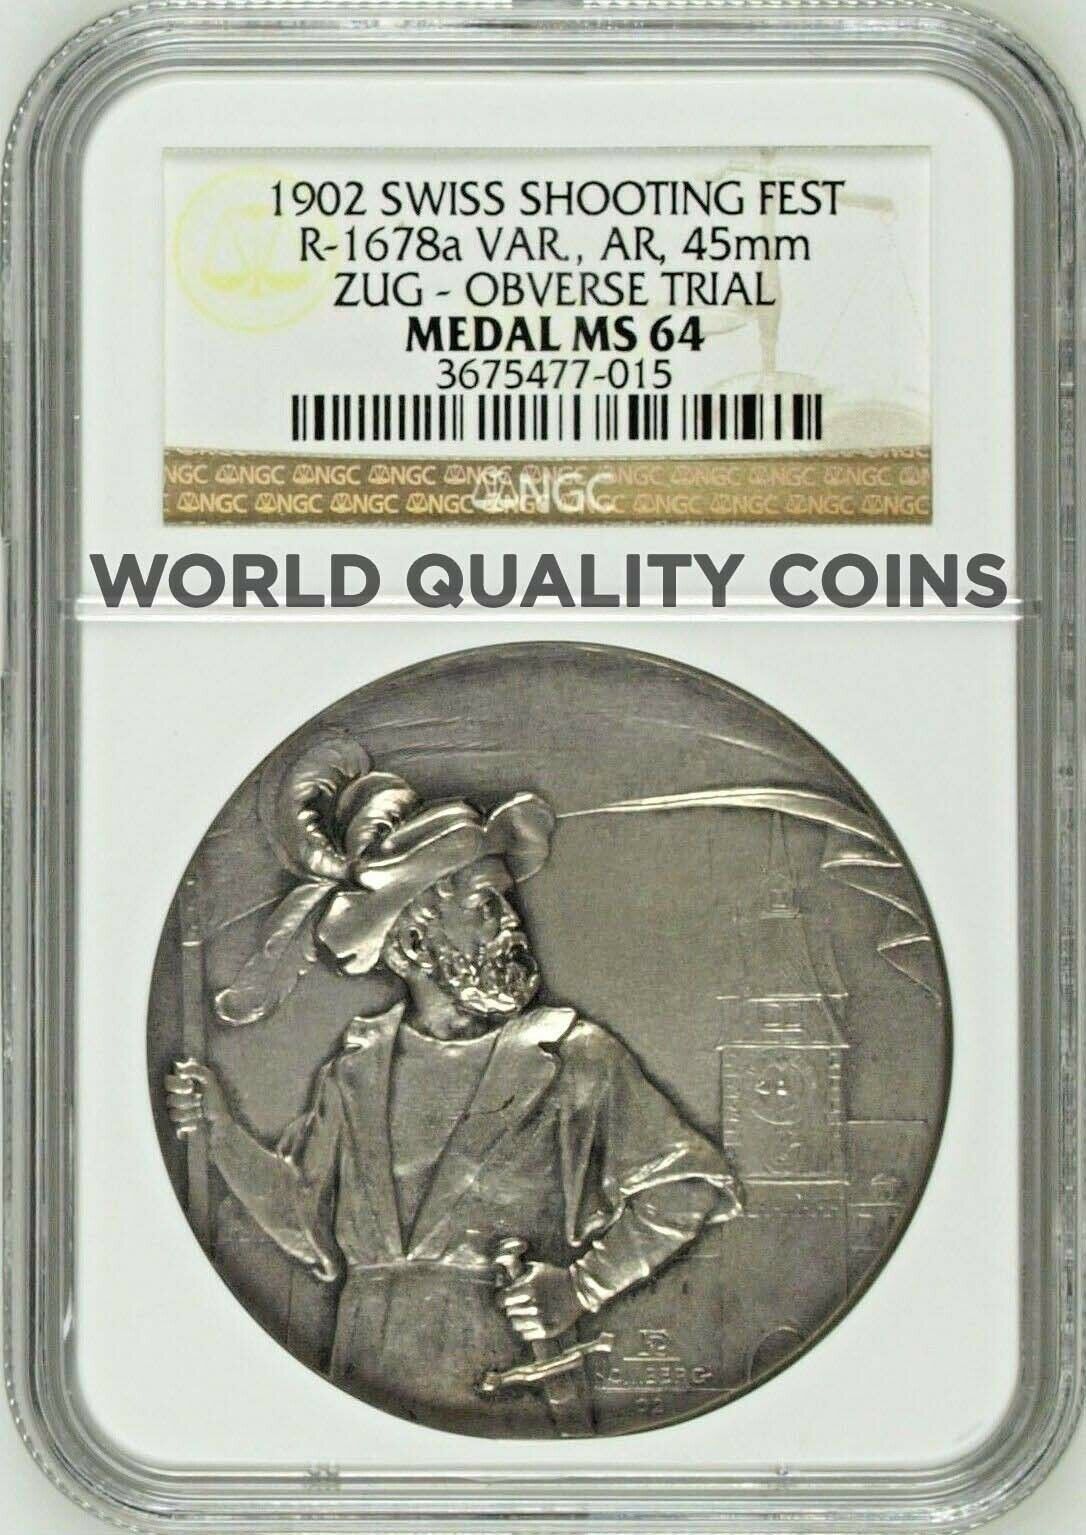 Swiss 1902 Silver Shooting Medal Zug Reverse Trial R-1678c One In The World Ngc